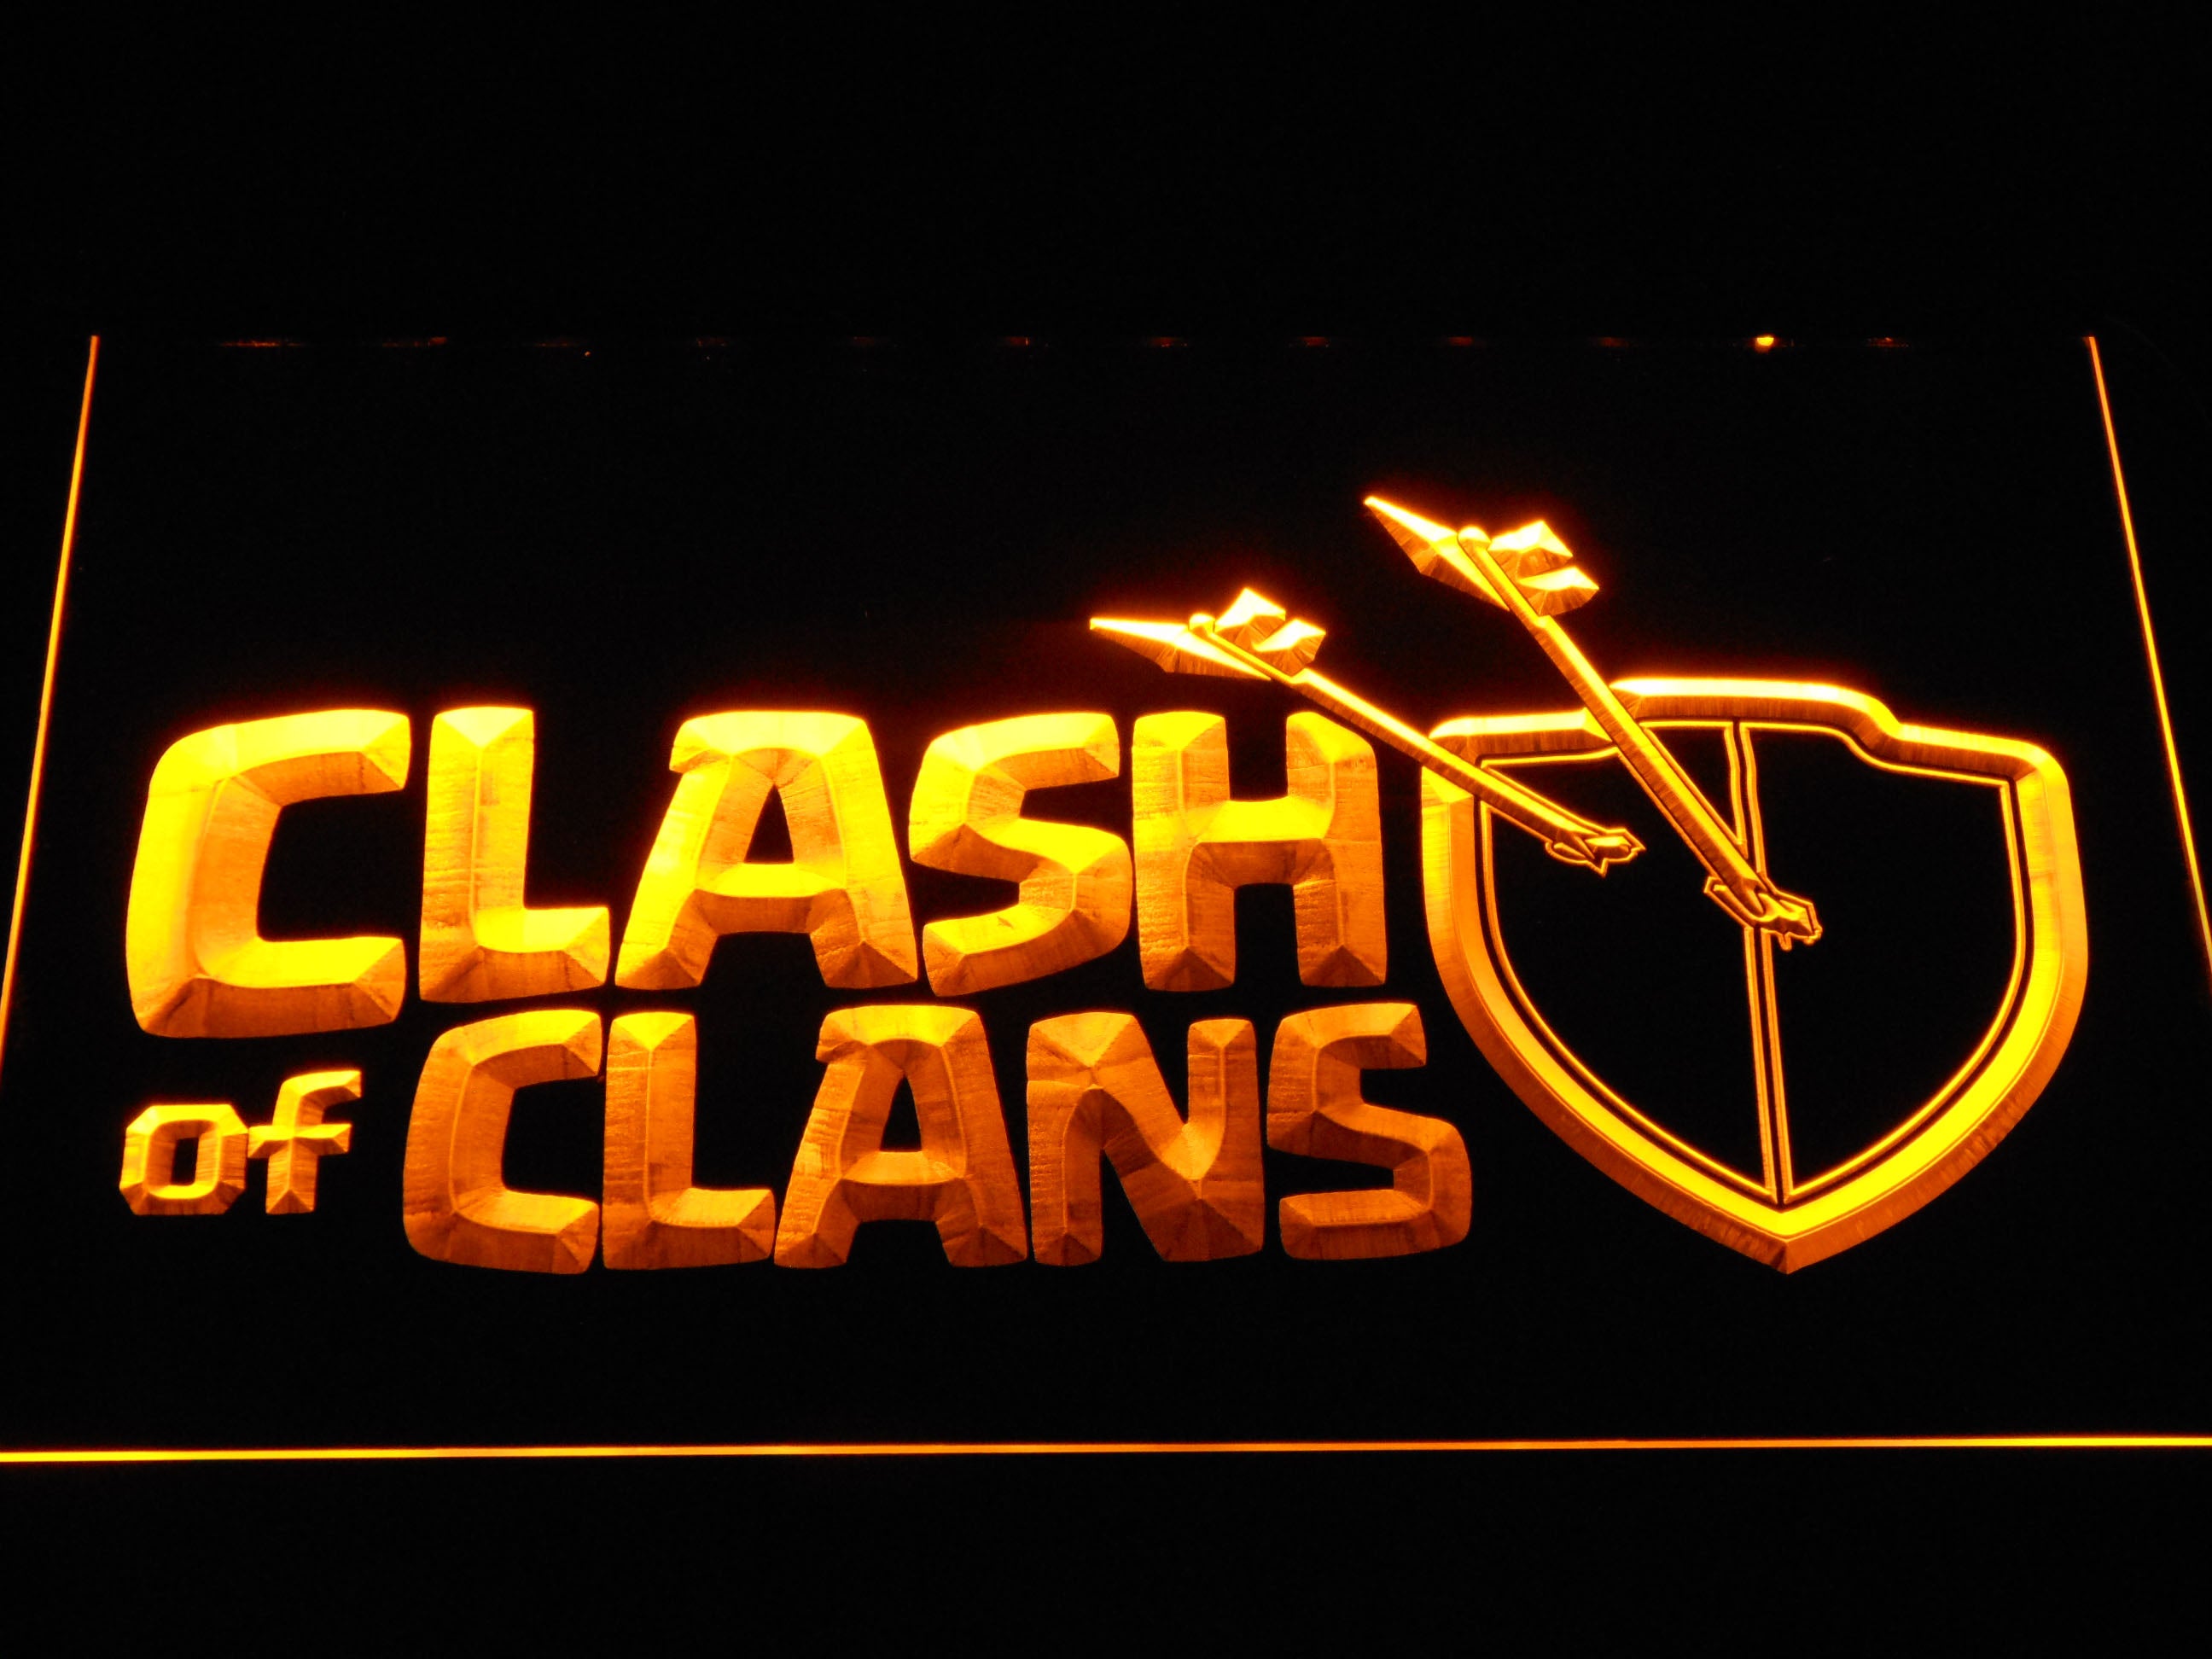 Clash of Clans Neon Light LED Sign